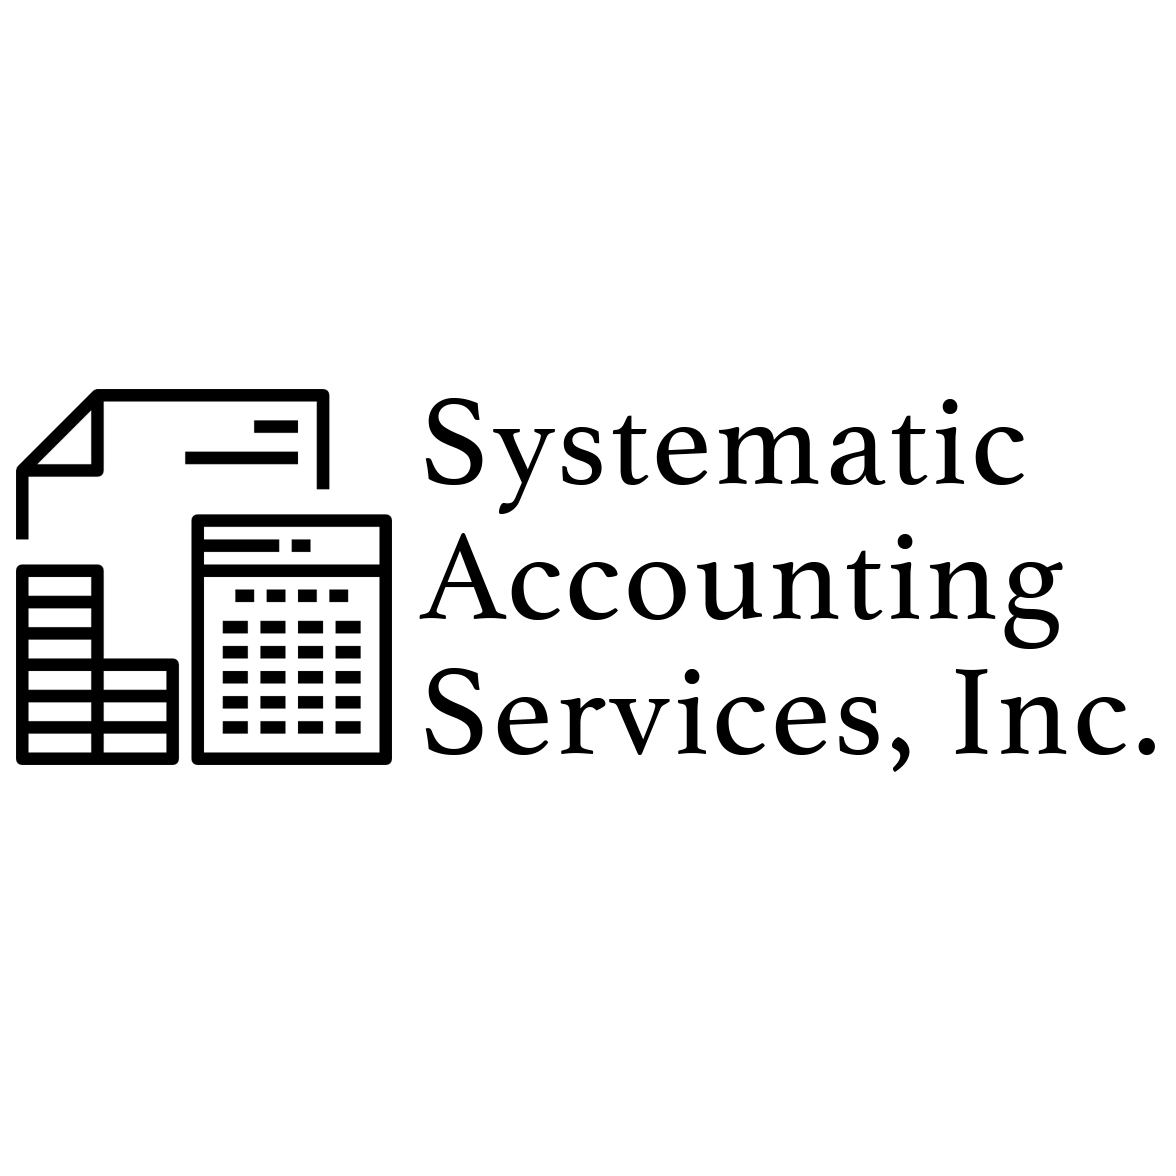 Systematic Accounting Services, Inc